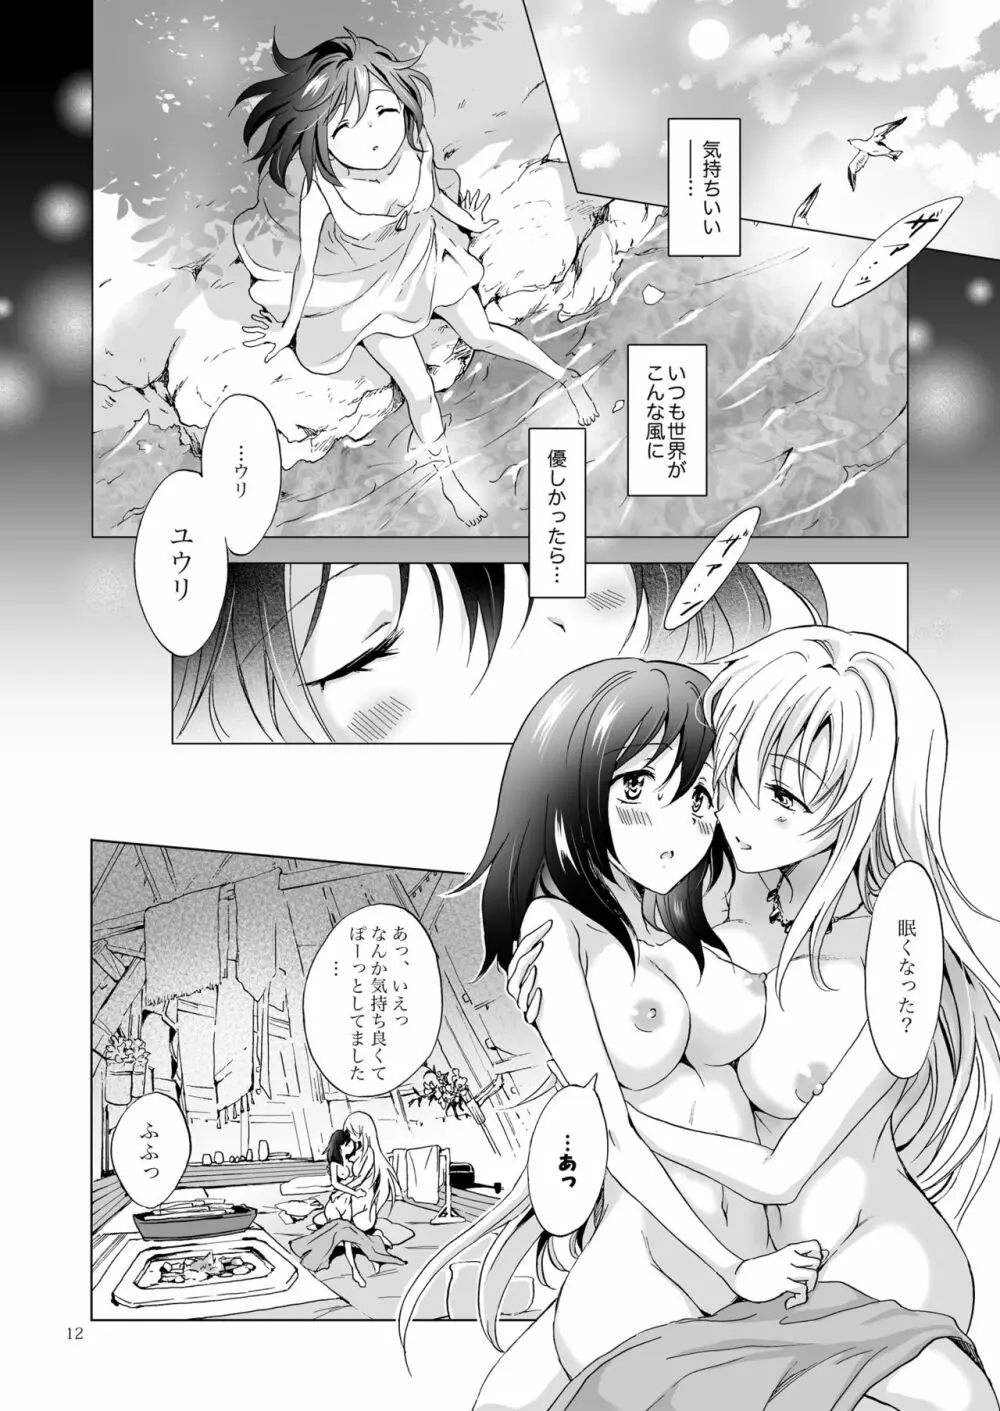 EARTH GIRLS 紡 - page11